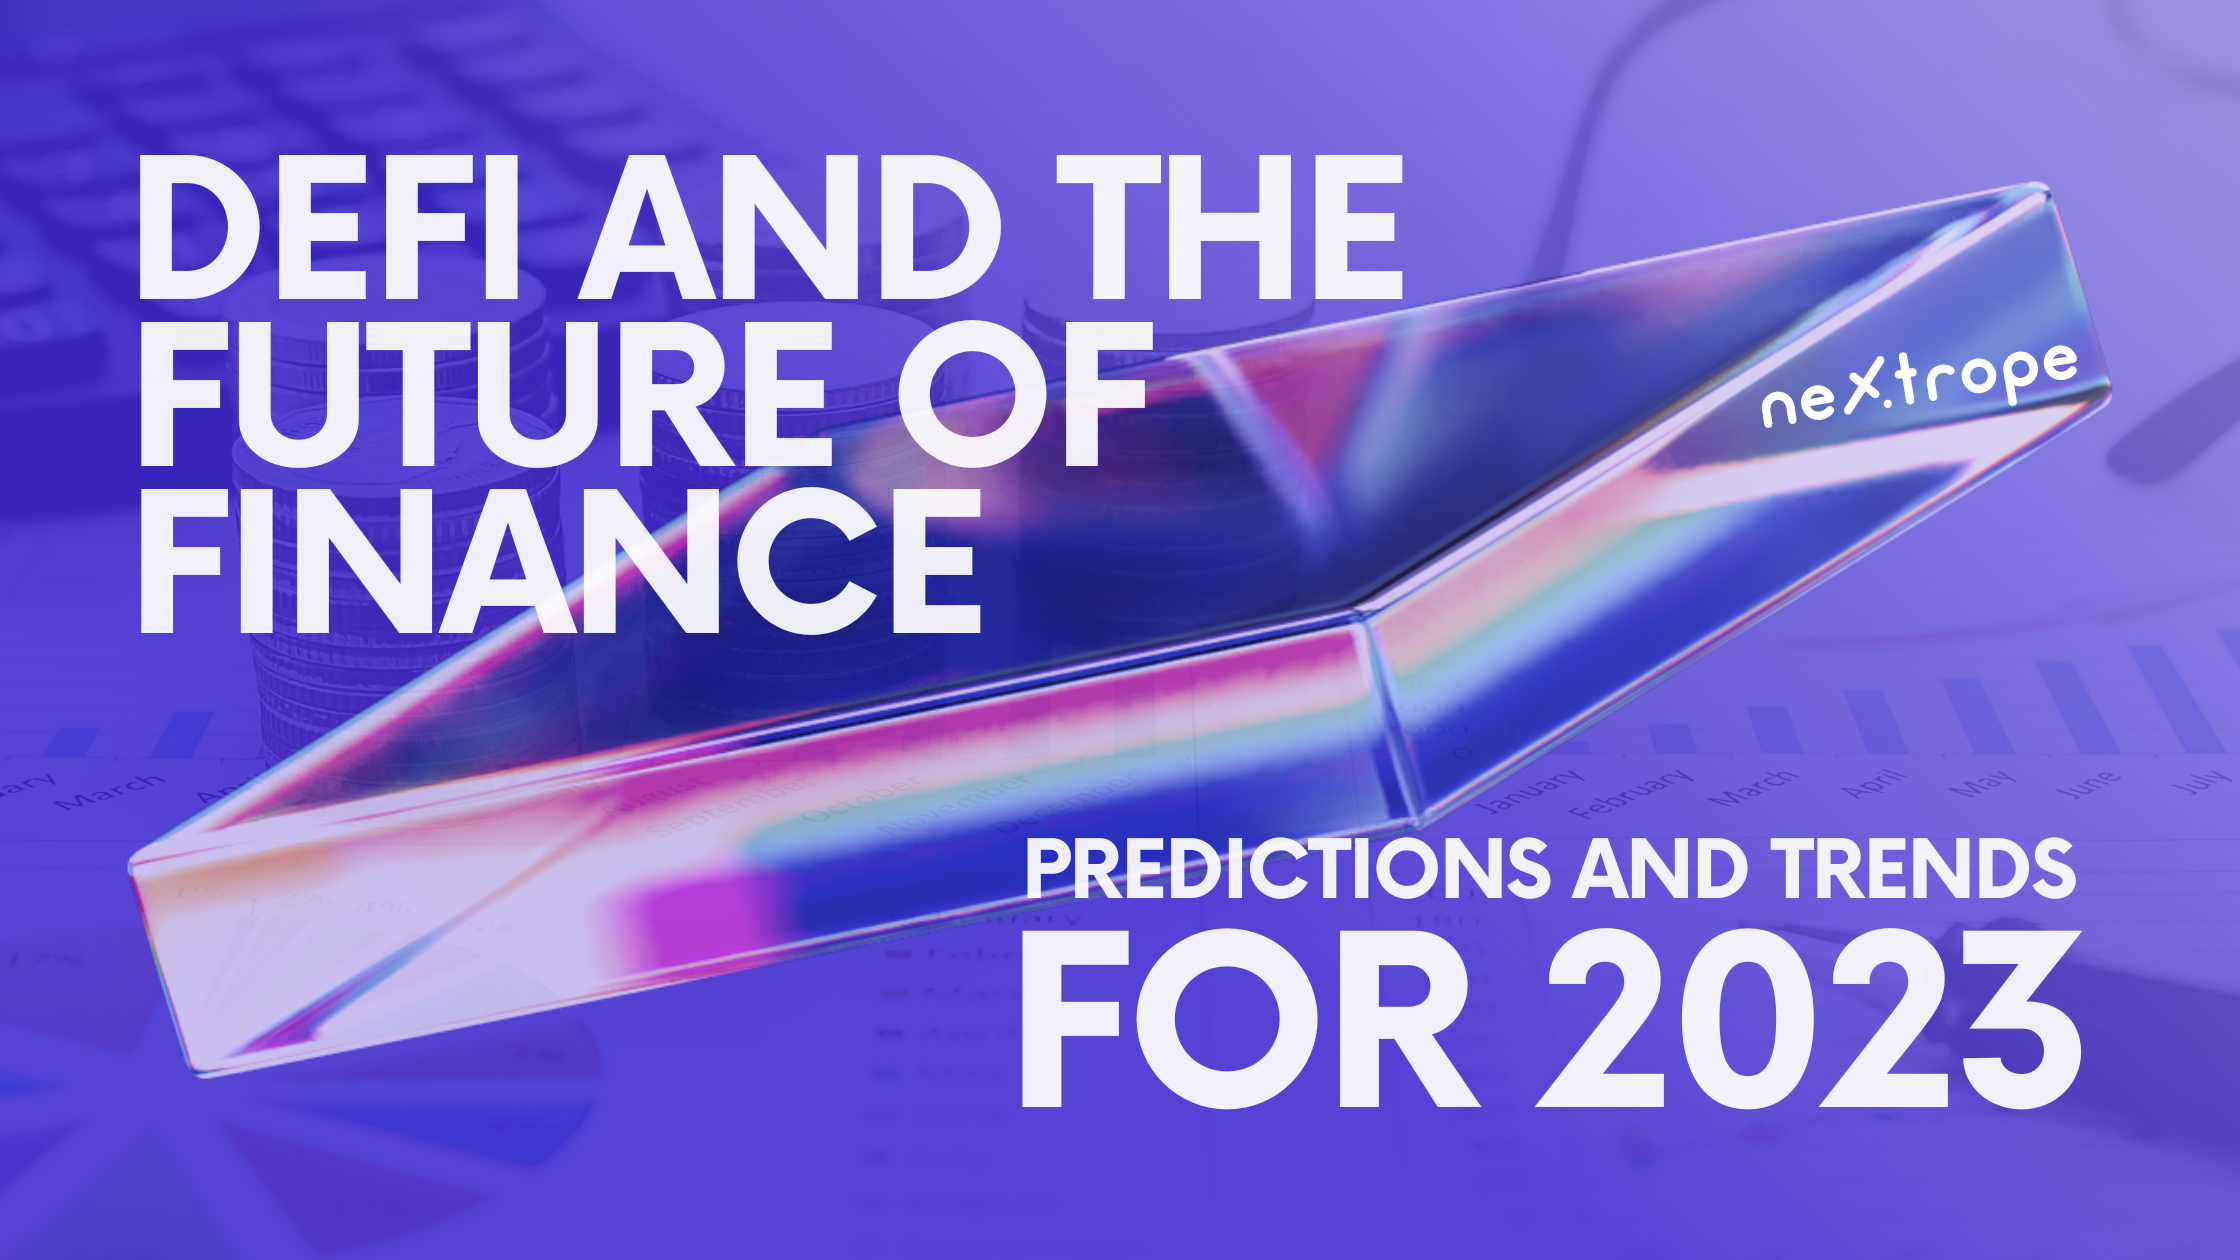 DeFi and the Future of Finance: Predictions and Trends for 2023